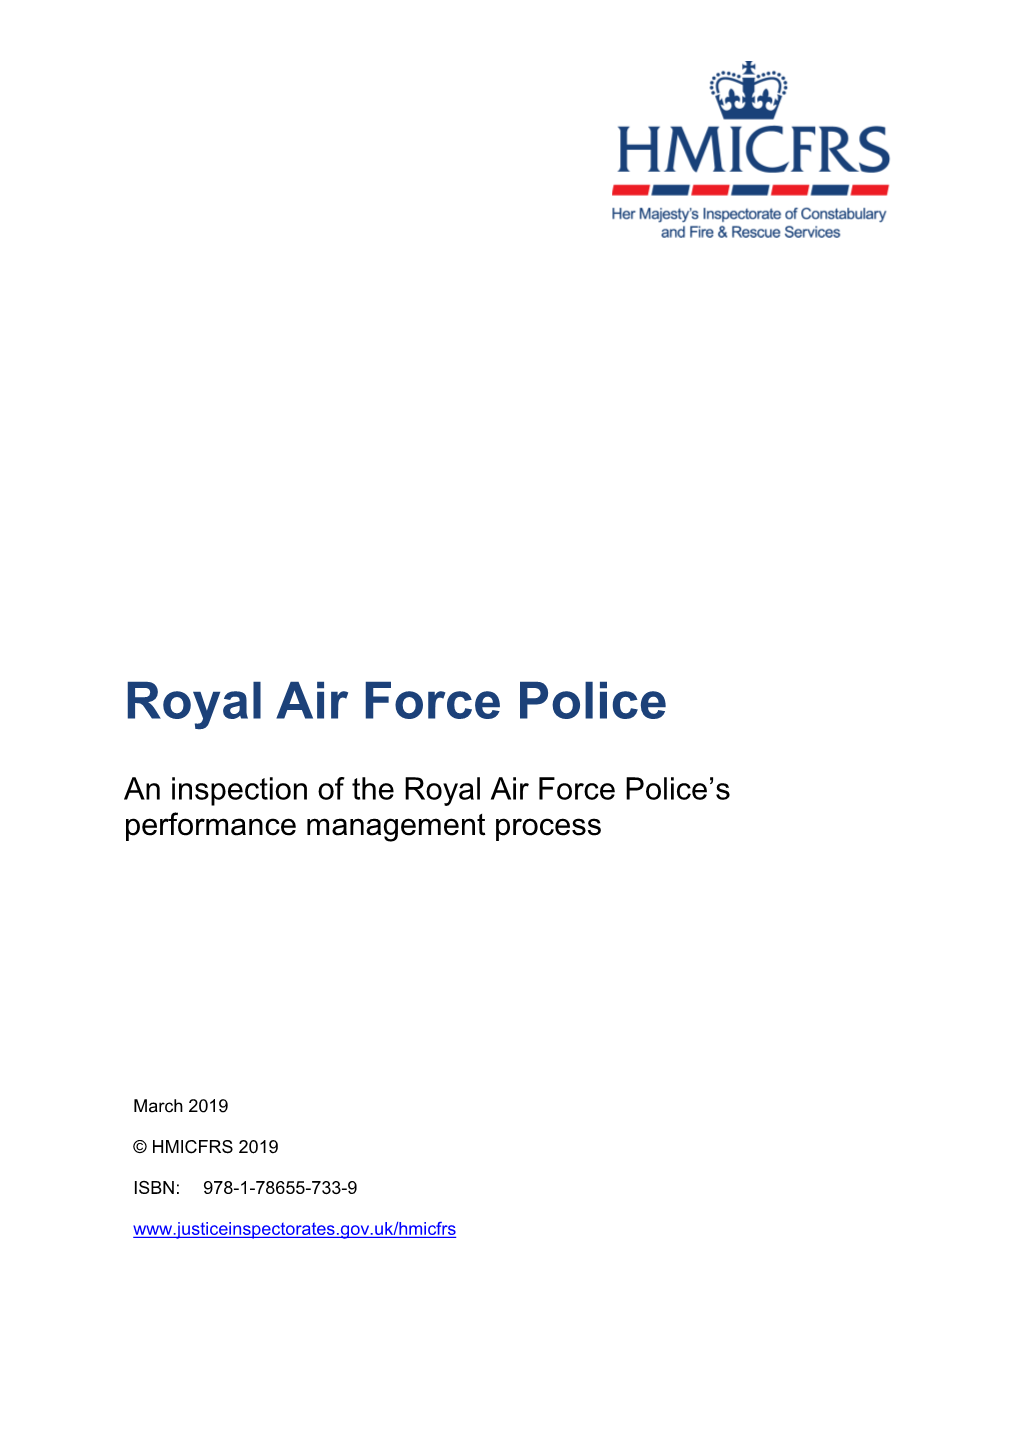 An Inspection of the Royal Air Force Police's Performance Management